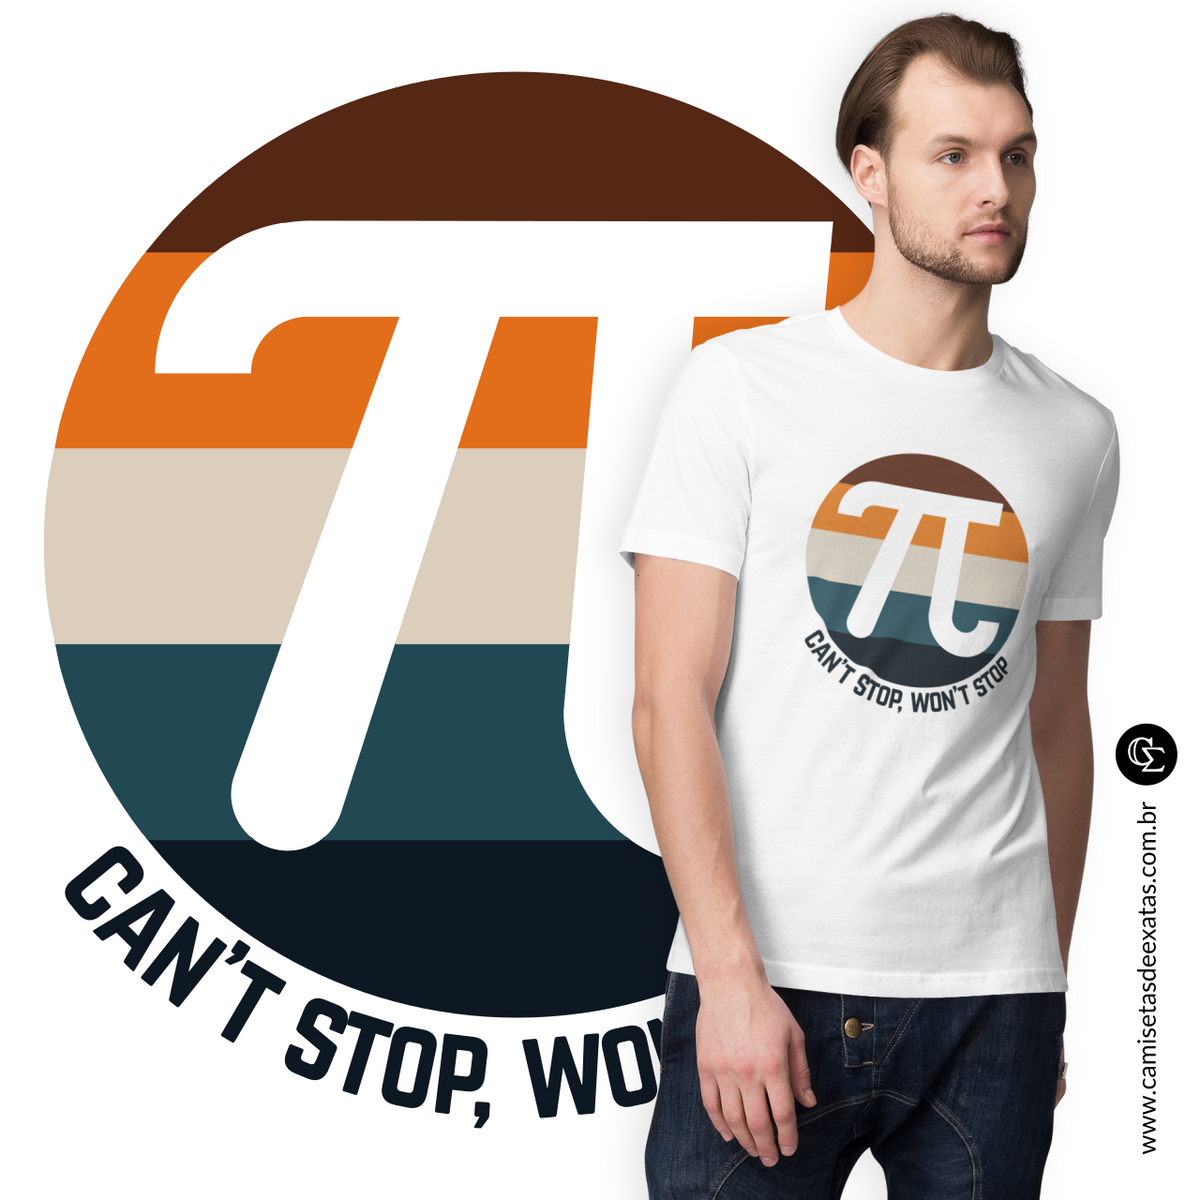 Nome do produto: CAN\'T STOP, WON\'T STOP [2]